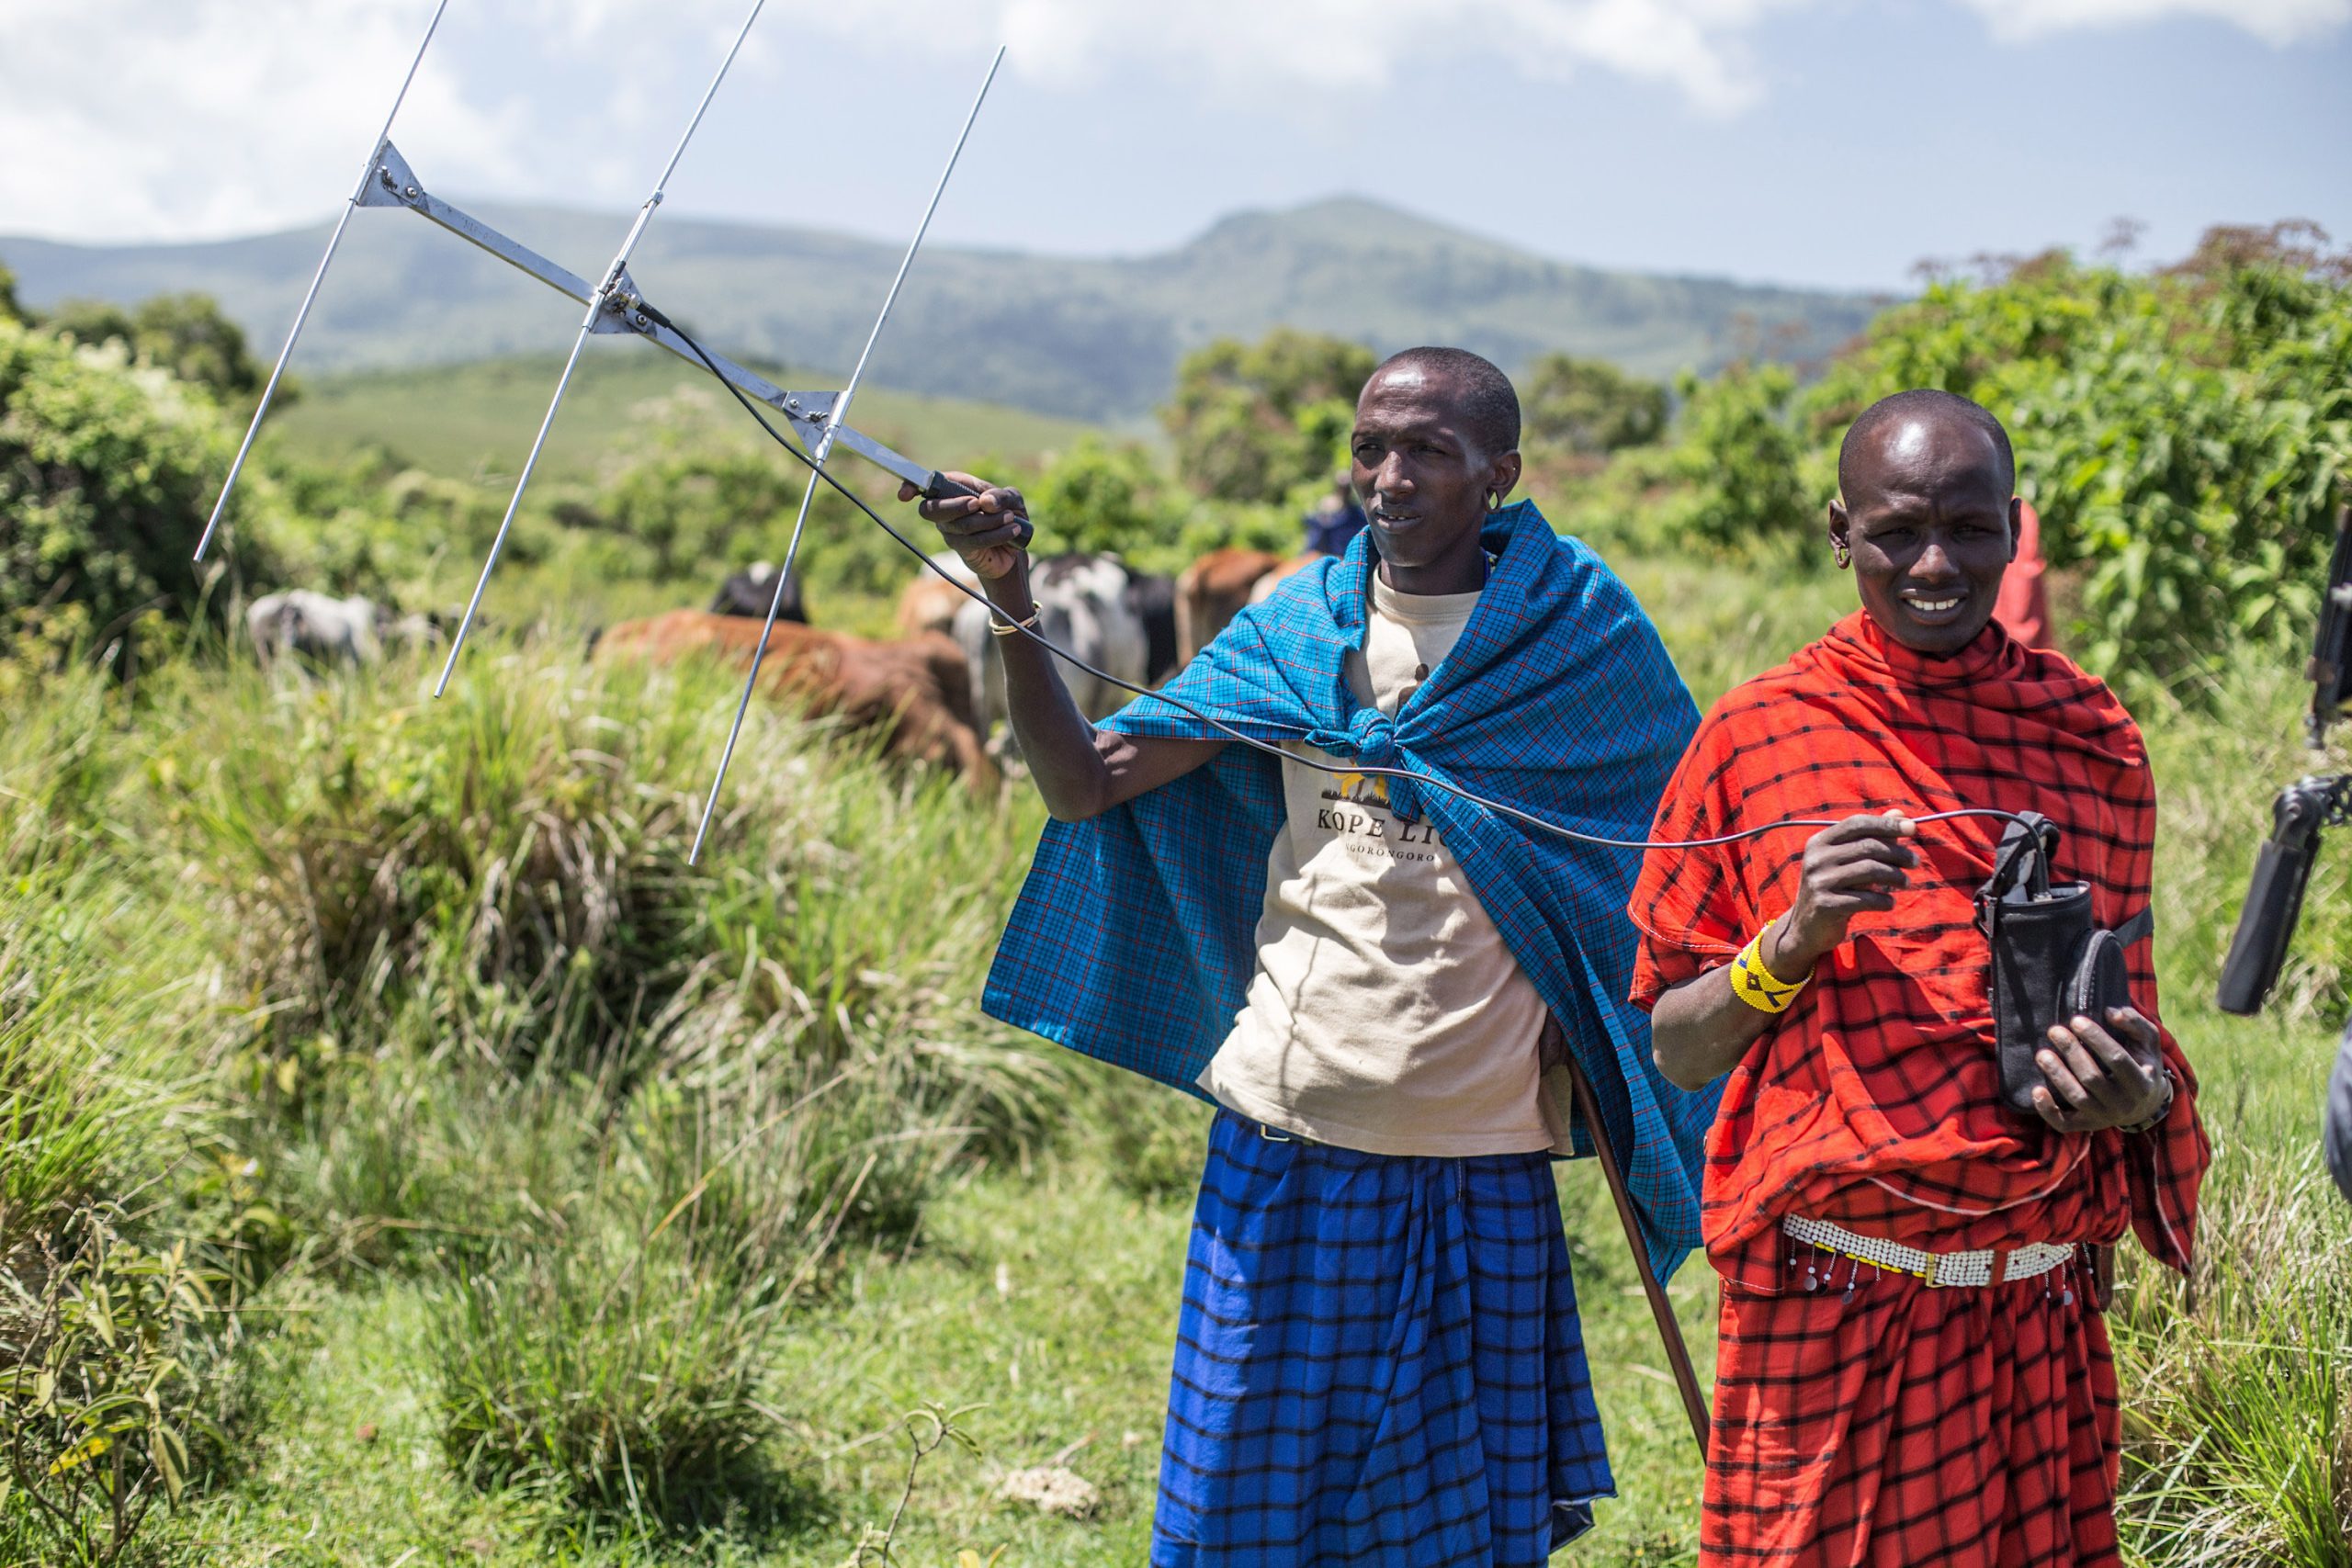 A pair of Maasai villagers helping with KopeLion conservation efforts in Ngorongoro Crater